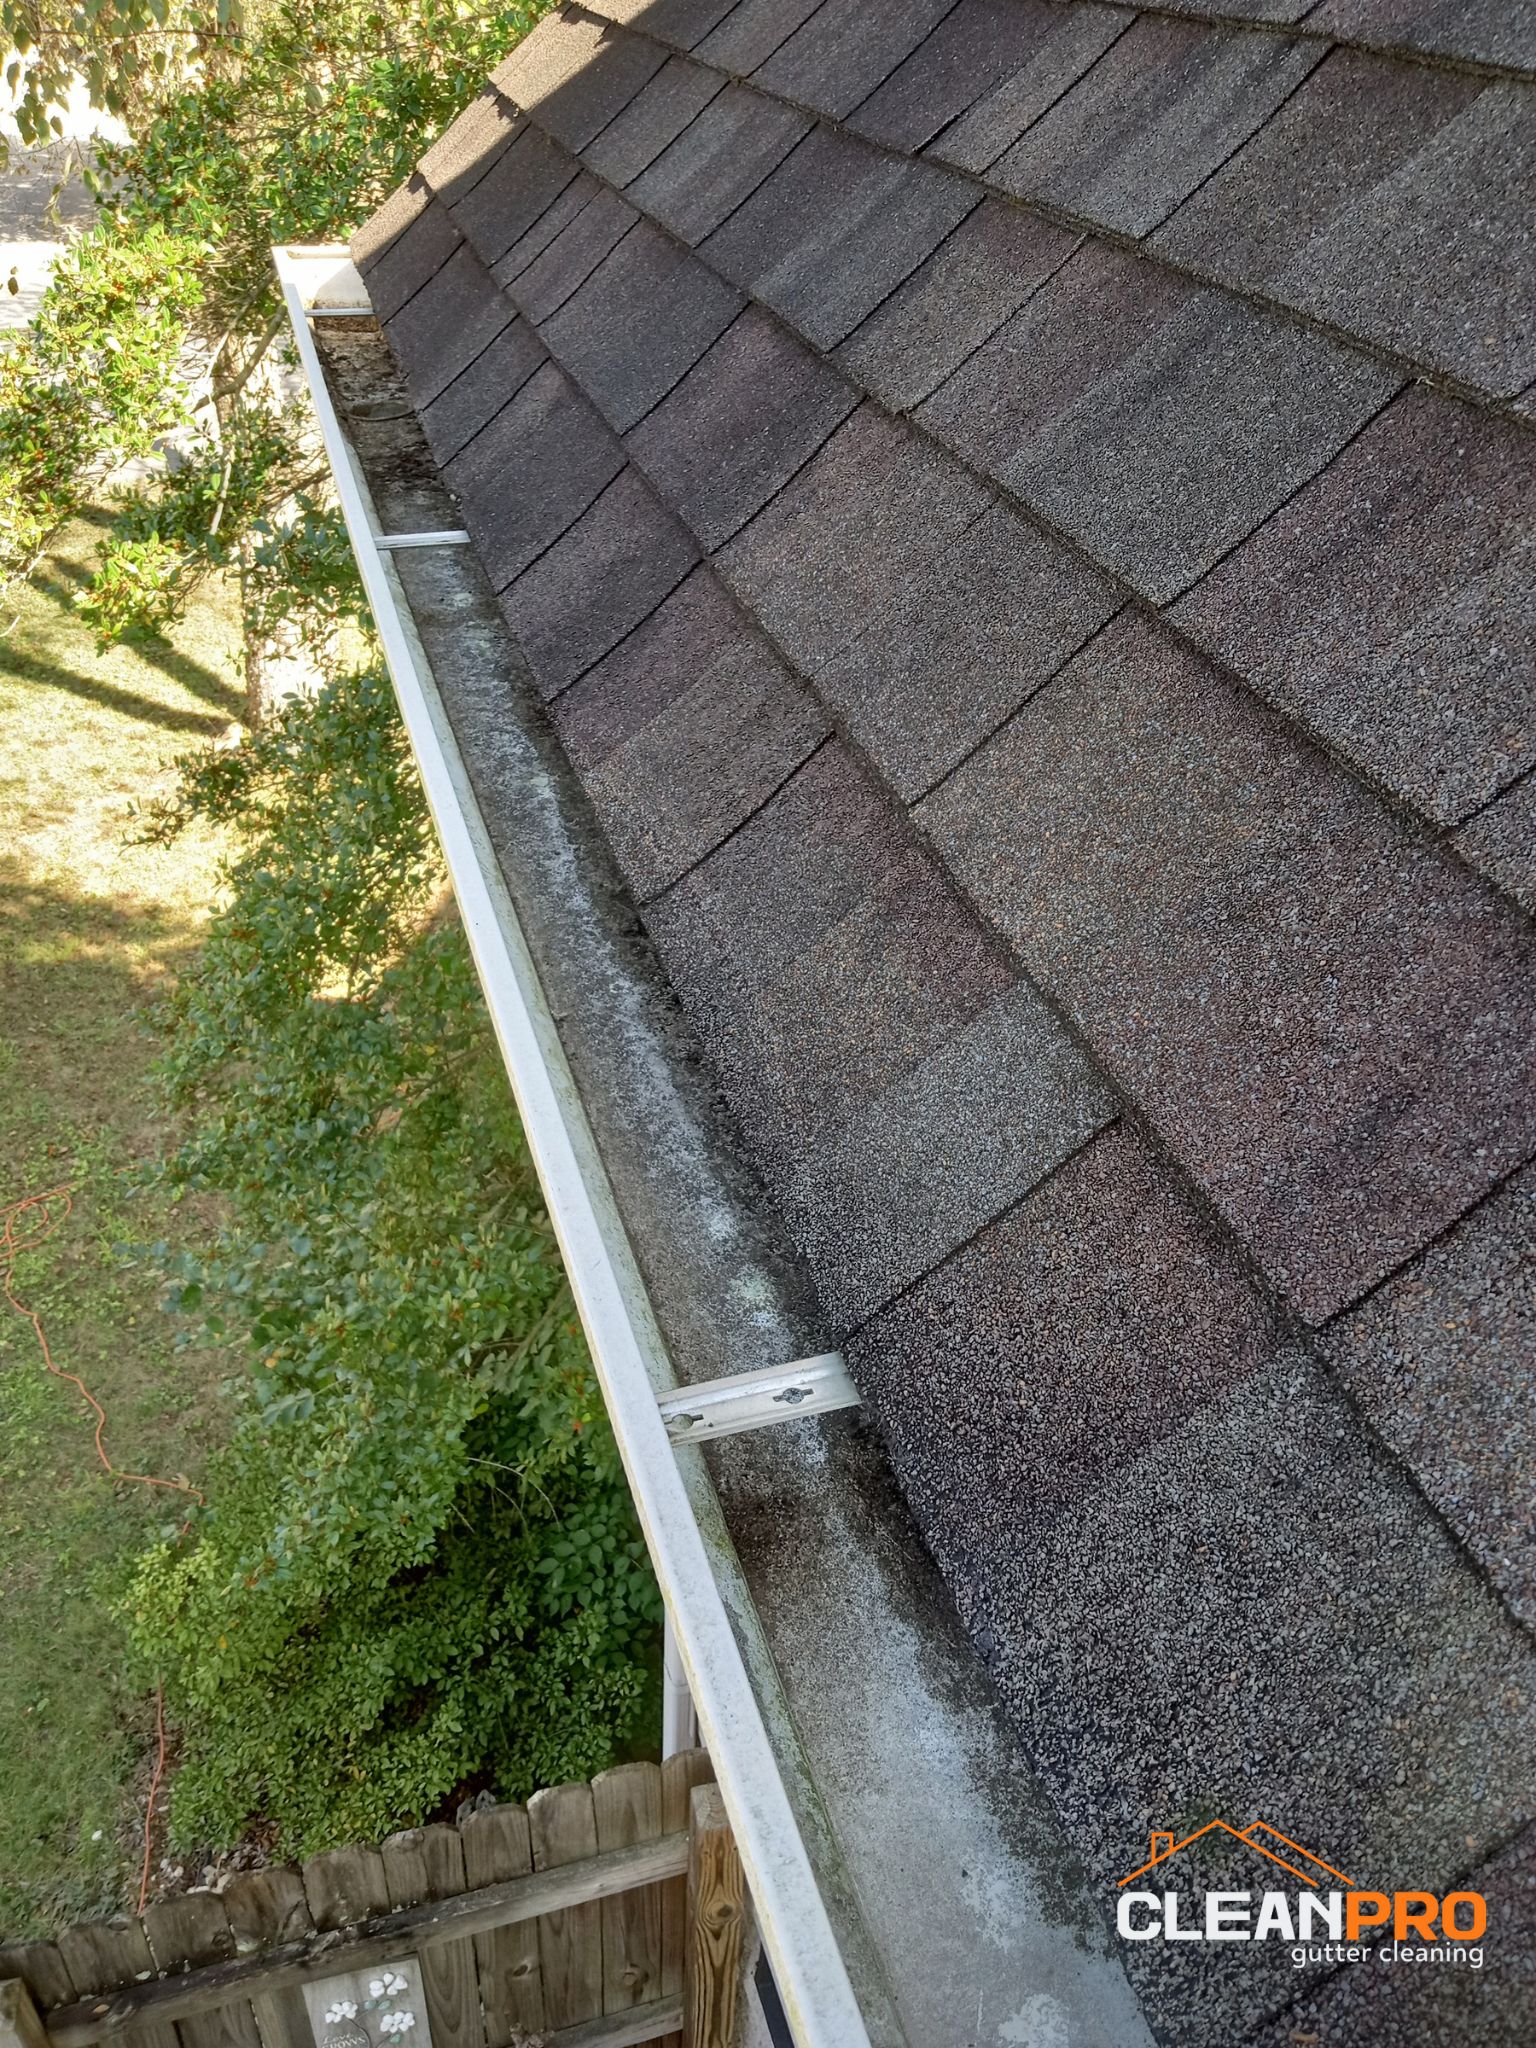 Best Gutter Cleaning Service in Overland Park